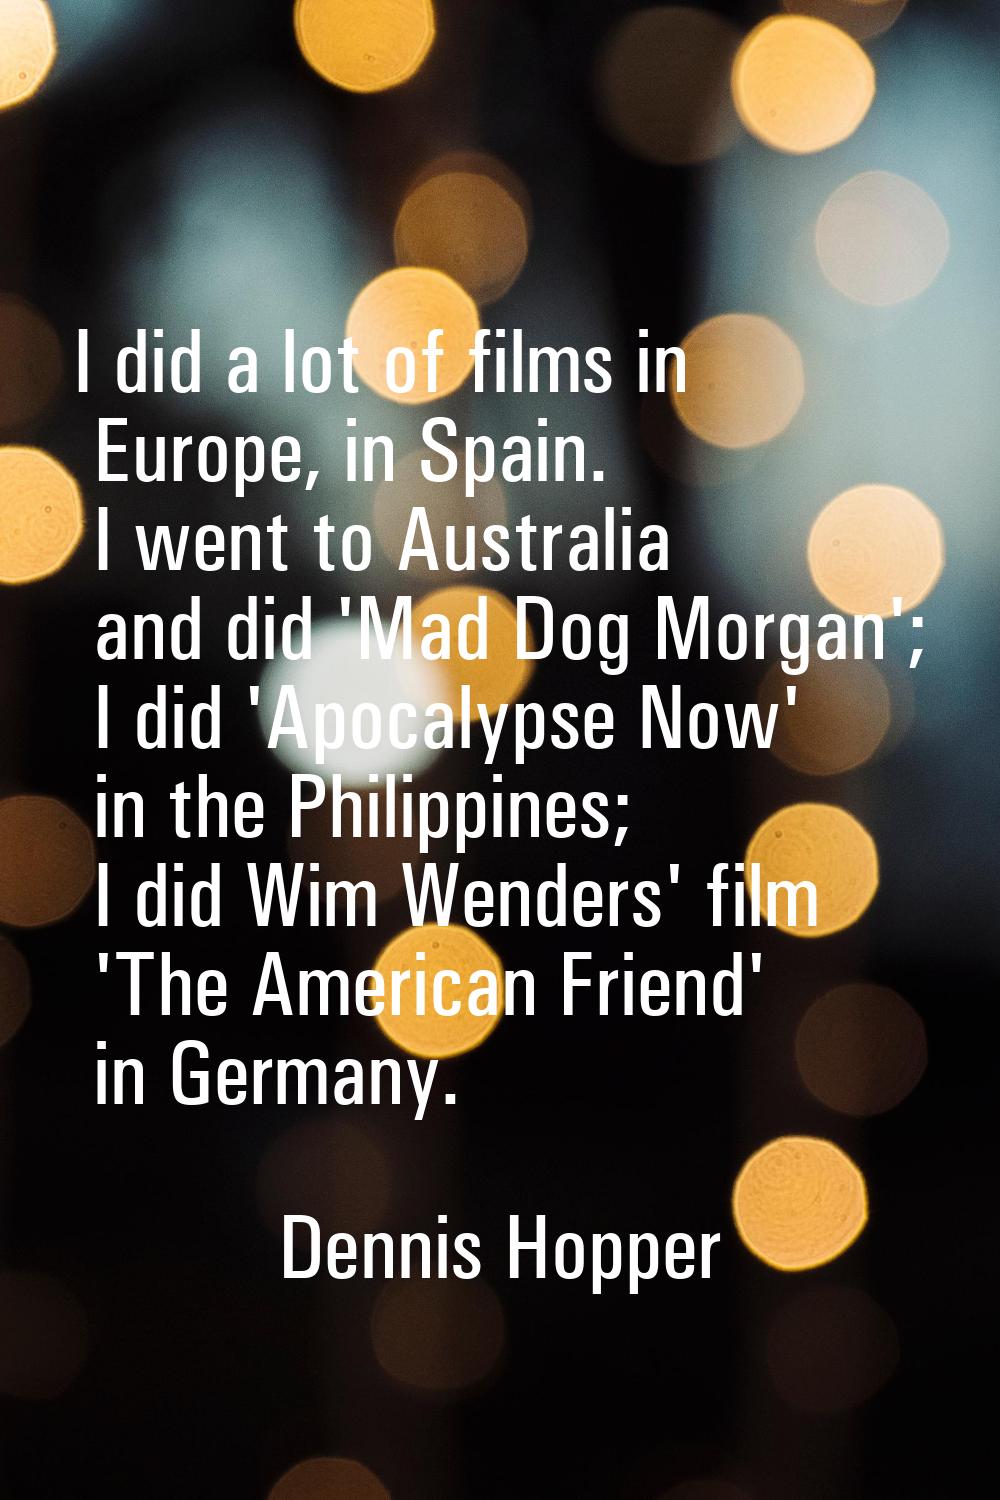 I did a lot of films in Europe, in Spain. I went to Australia and did 'Mad Dog Morgan'; I did 'Apoc